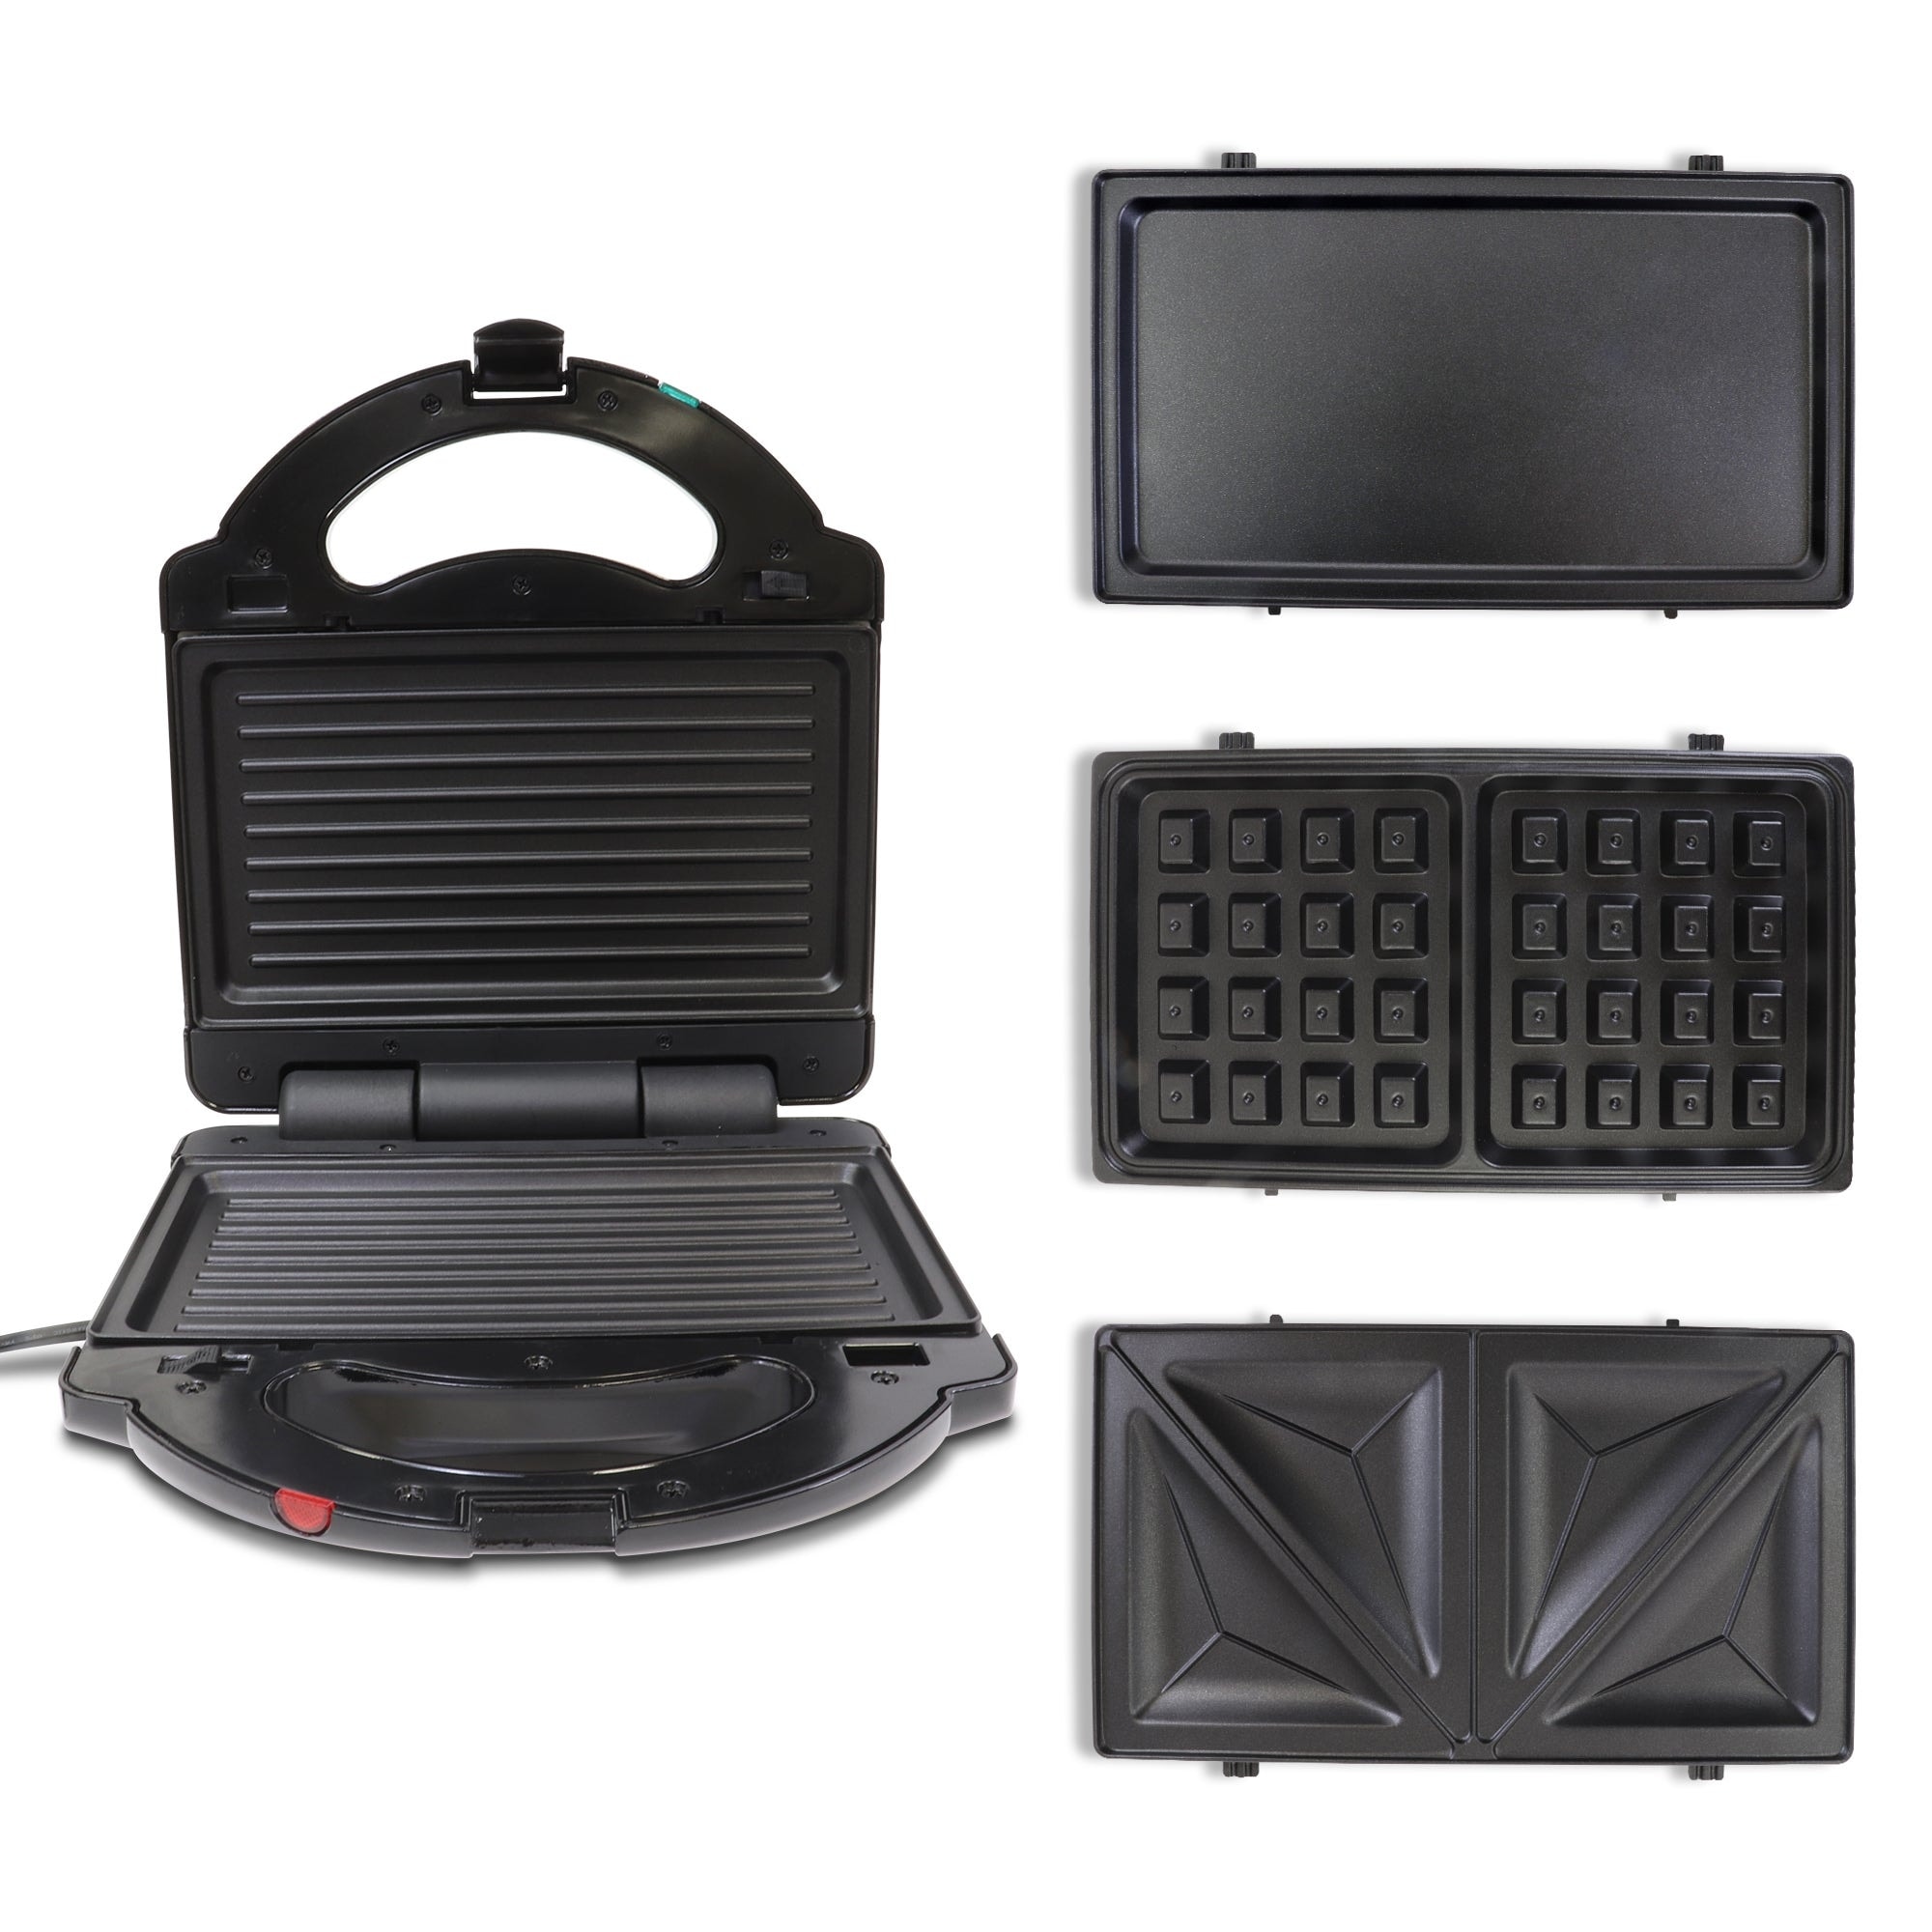 https://ak1.ostkcdn.com/images/products/is/images/direct/393ea56afea176b9999462d474bef55137d3b9ef/Total-Chef-4-in-1-Waffle-Iron%2C-Grill%2C-Sandwich-Maker%2C-Griddle-with-Interchangeable-Non-Stick-Plates.jpg